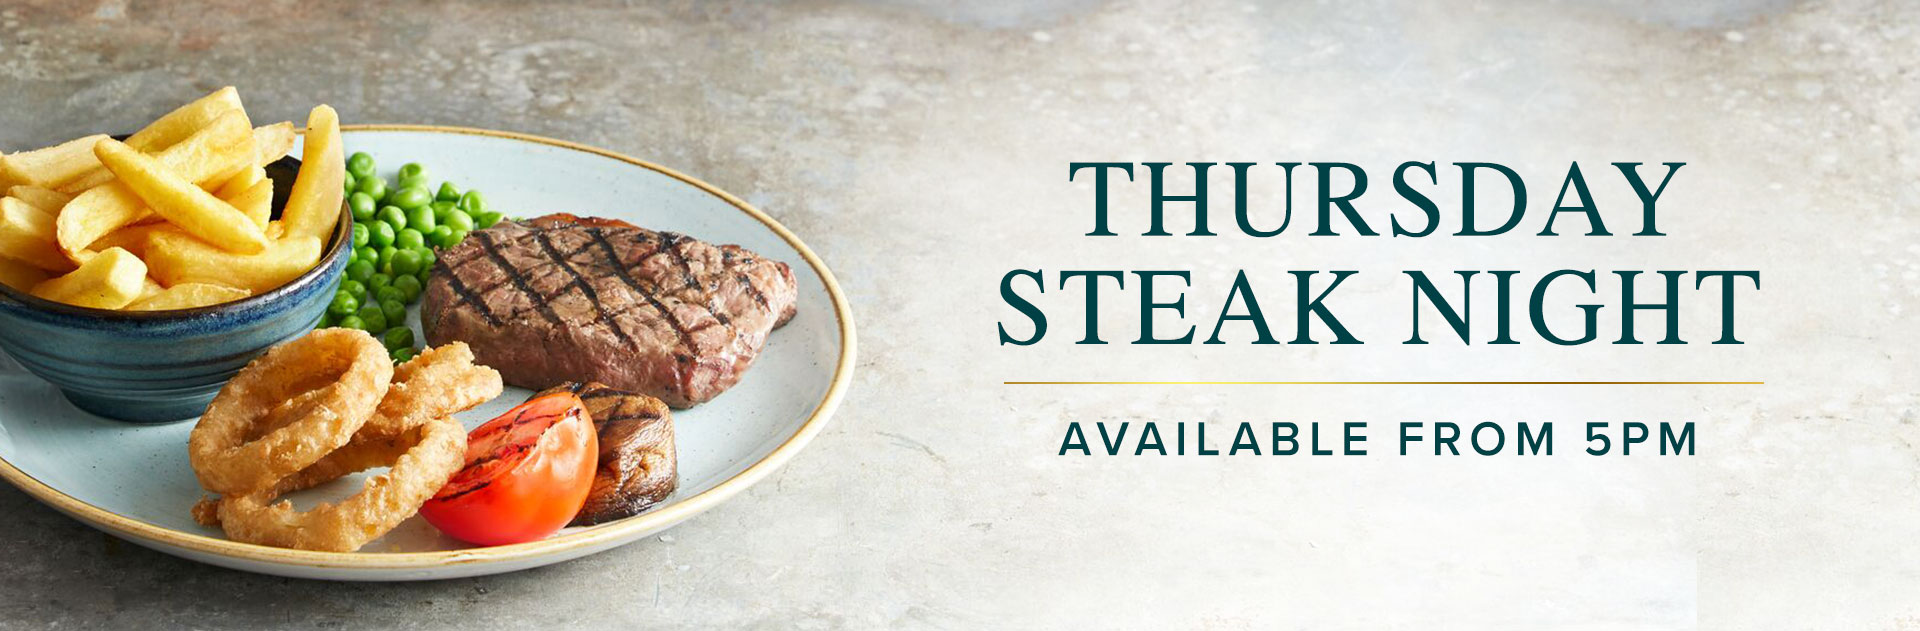 Thursday Steak Night at The Huntsman and Hounds